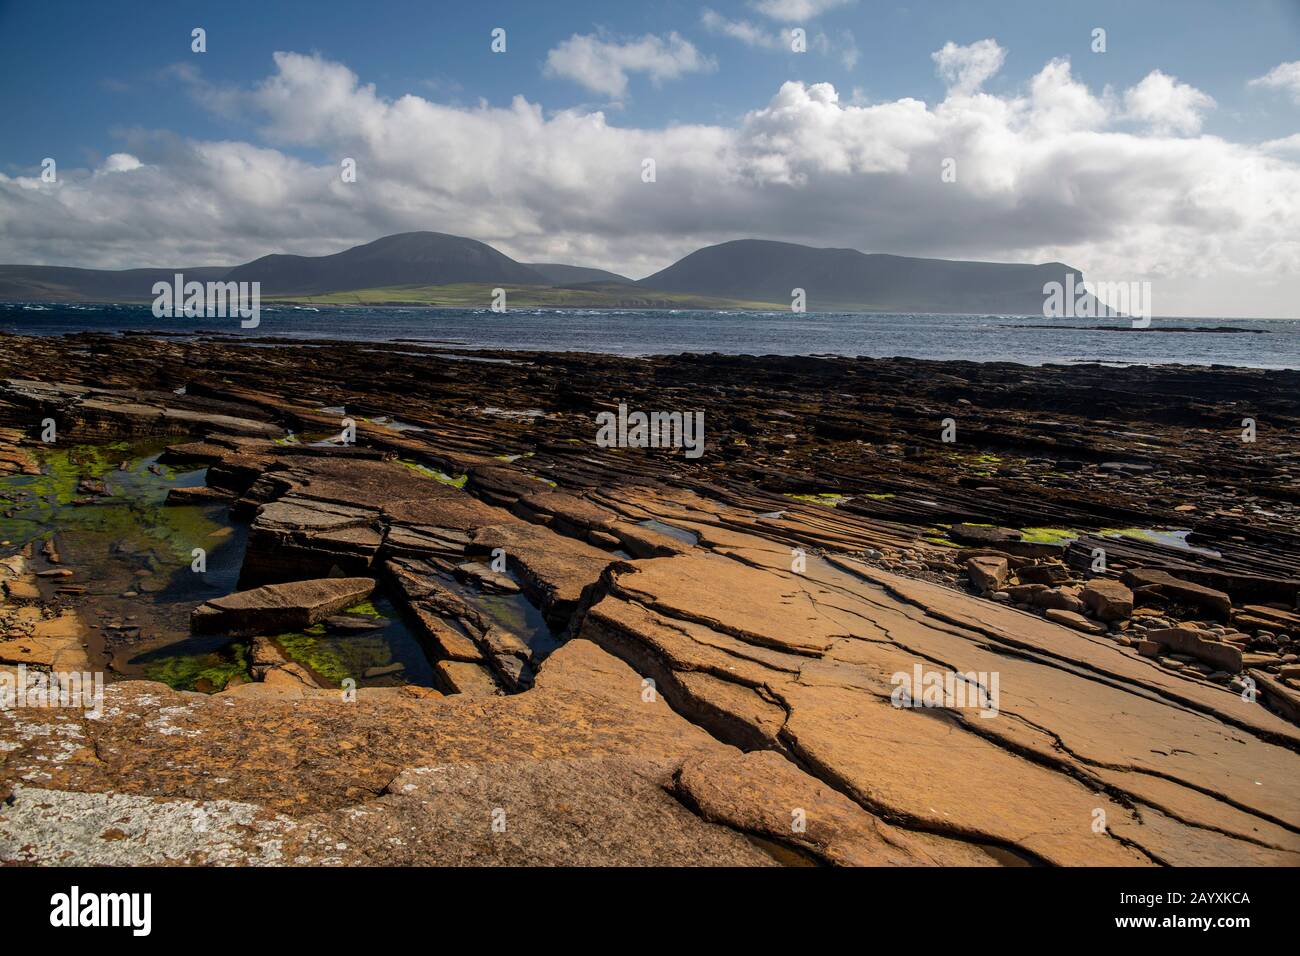 Orkney, Scotland, UK - Warbeth Beach, Stromness, Orkney with a view to Hoy, Orkney Islands Stock Photo